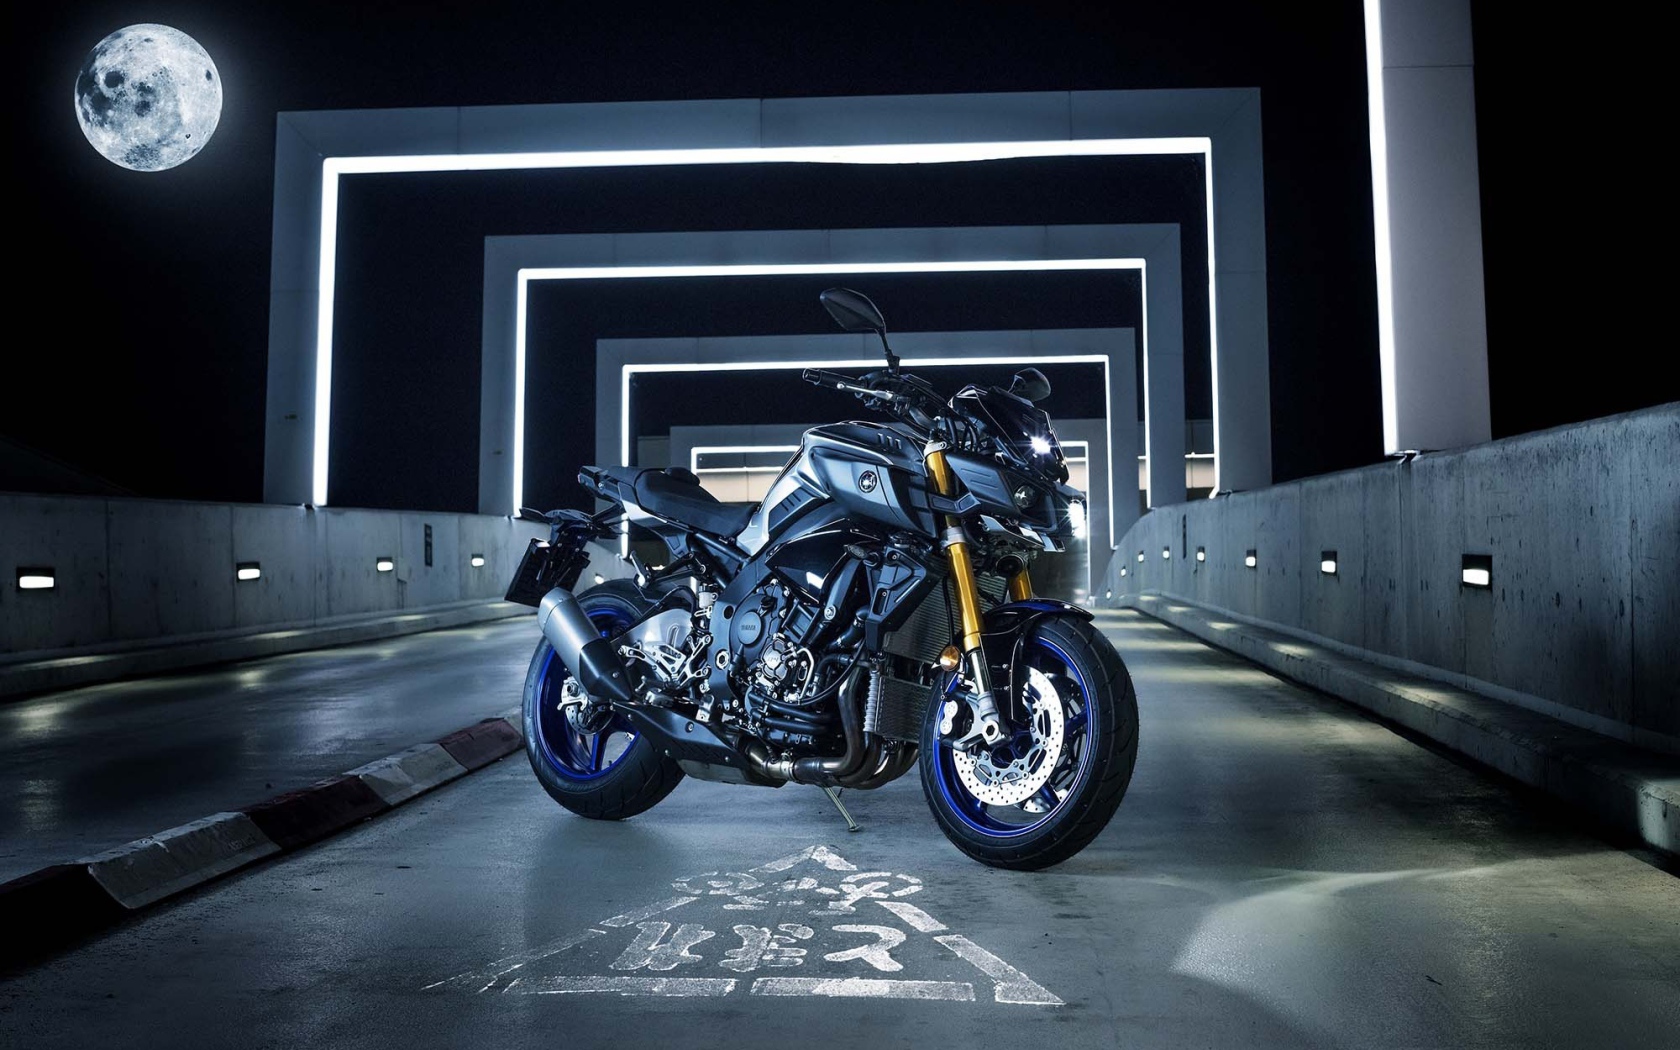 Motorcycle Yamaha MT-10 SP, 2017 in the light of the moon